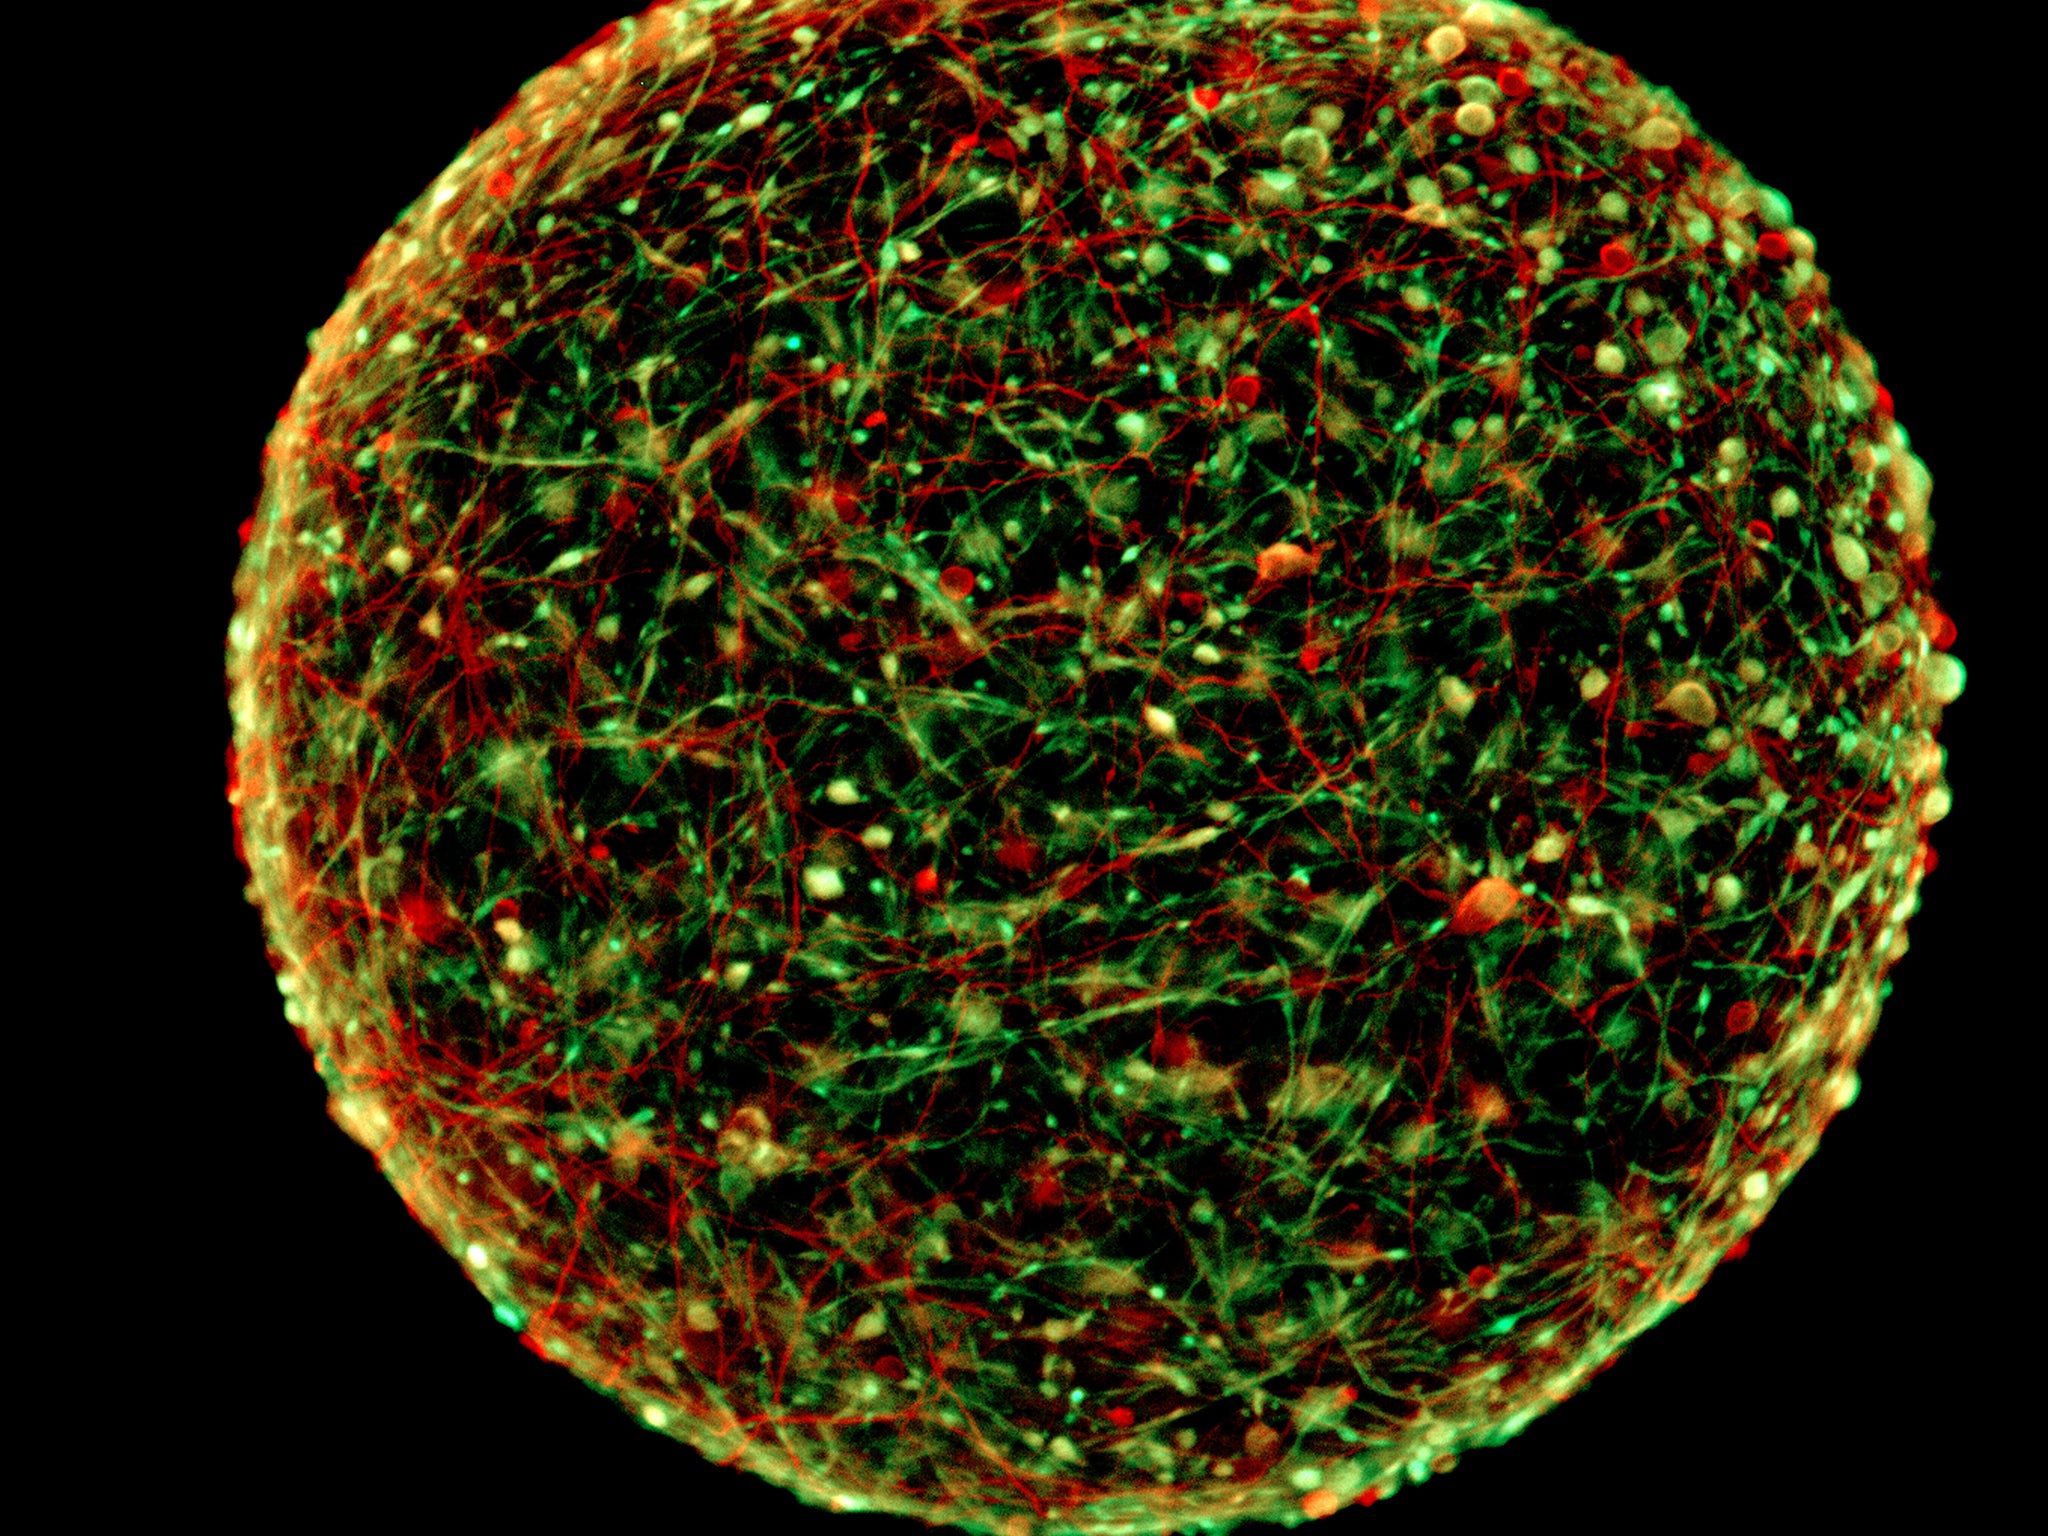 A magnified image of one of the ‘mini brains’, which it is hoped will aid research into neurological diseases